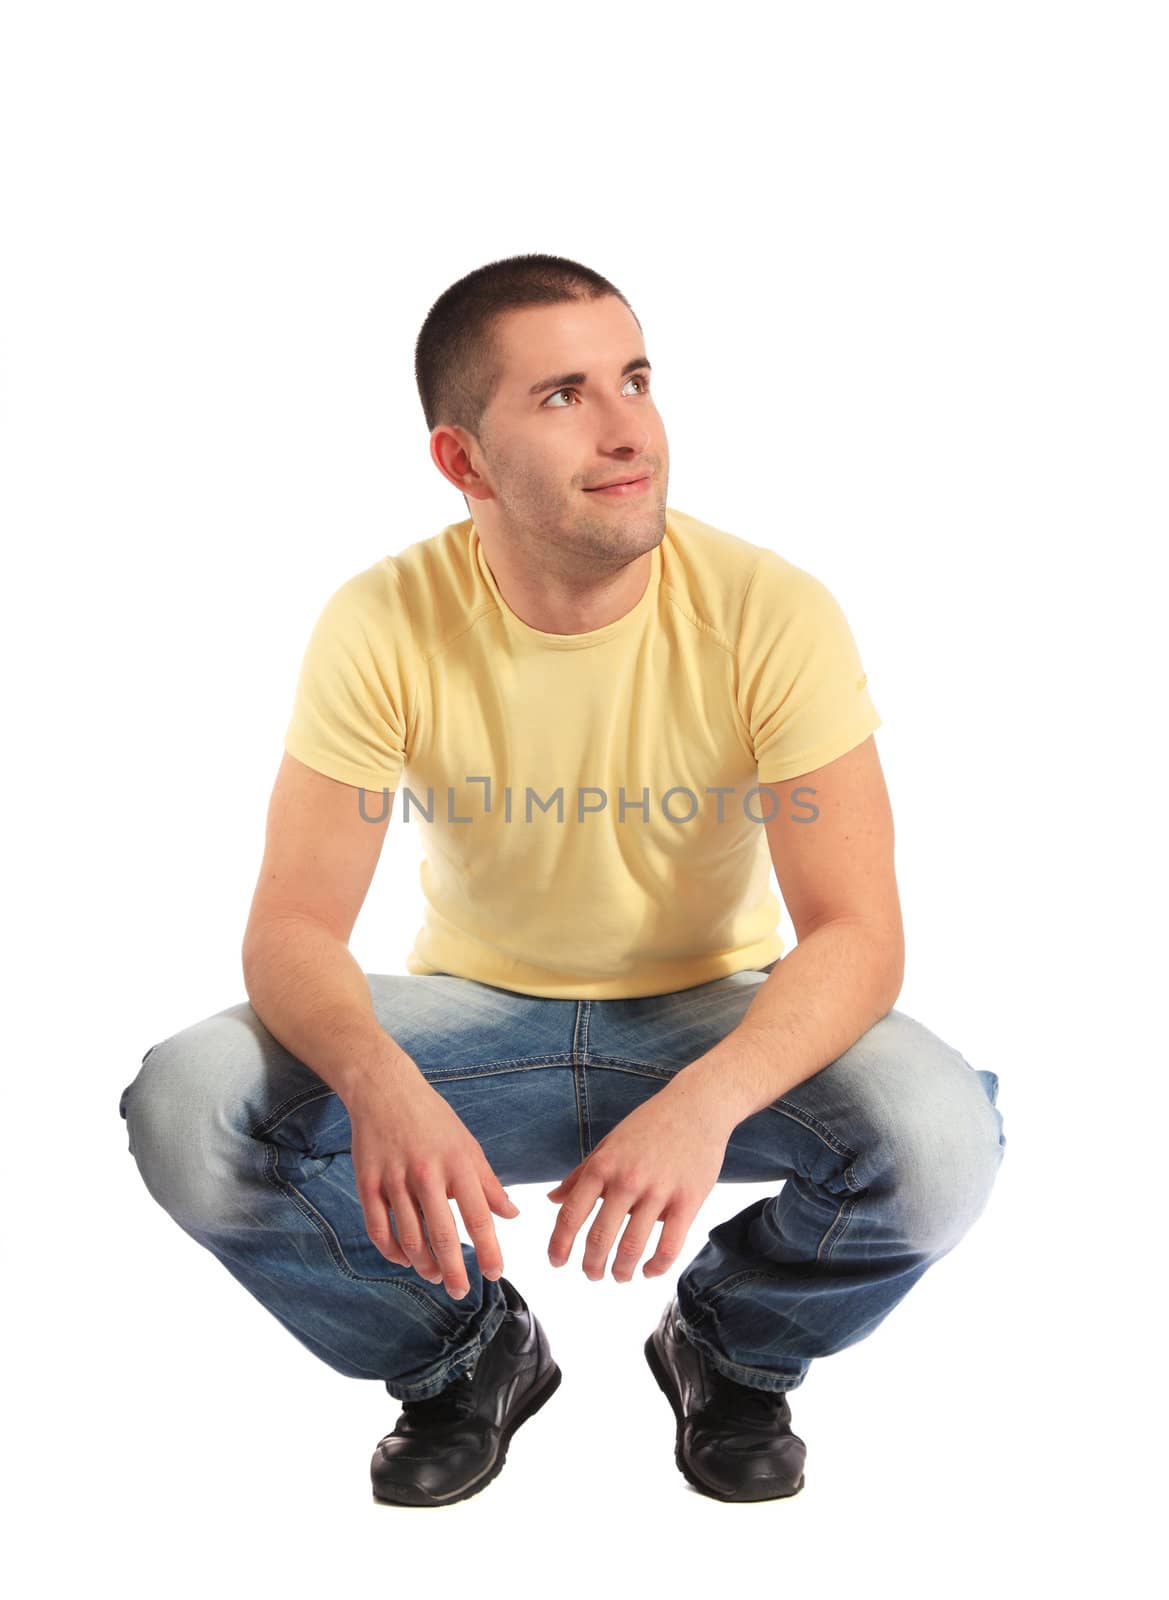 Attractive young man in squatting position. All on white background